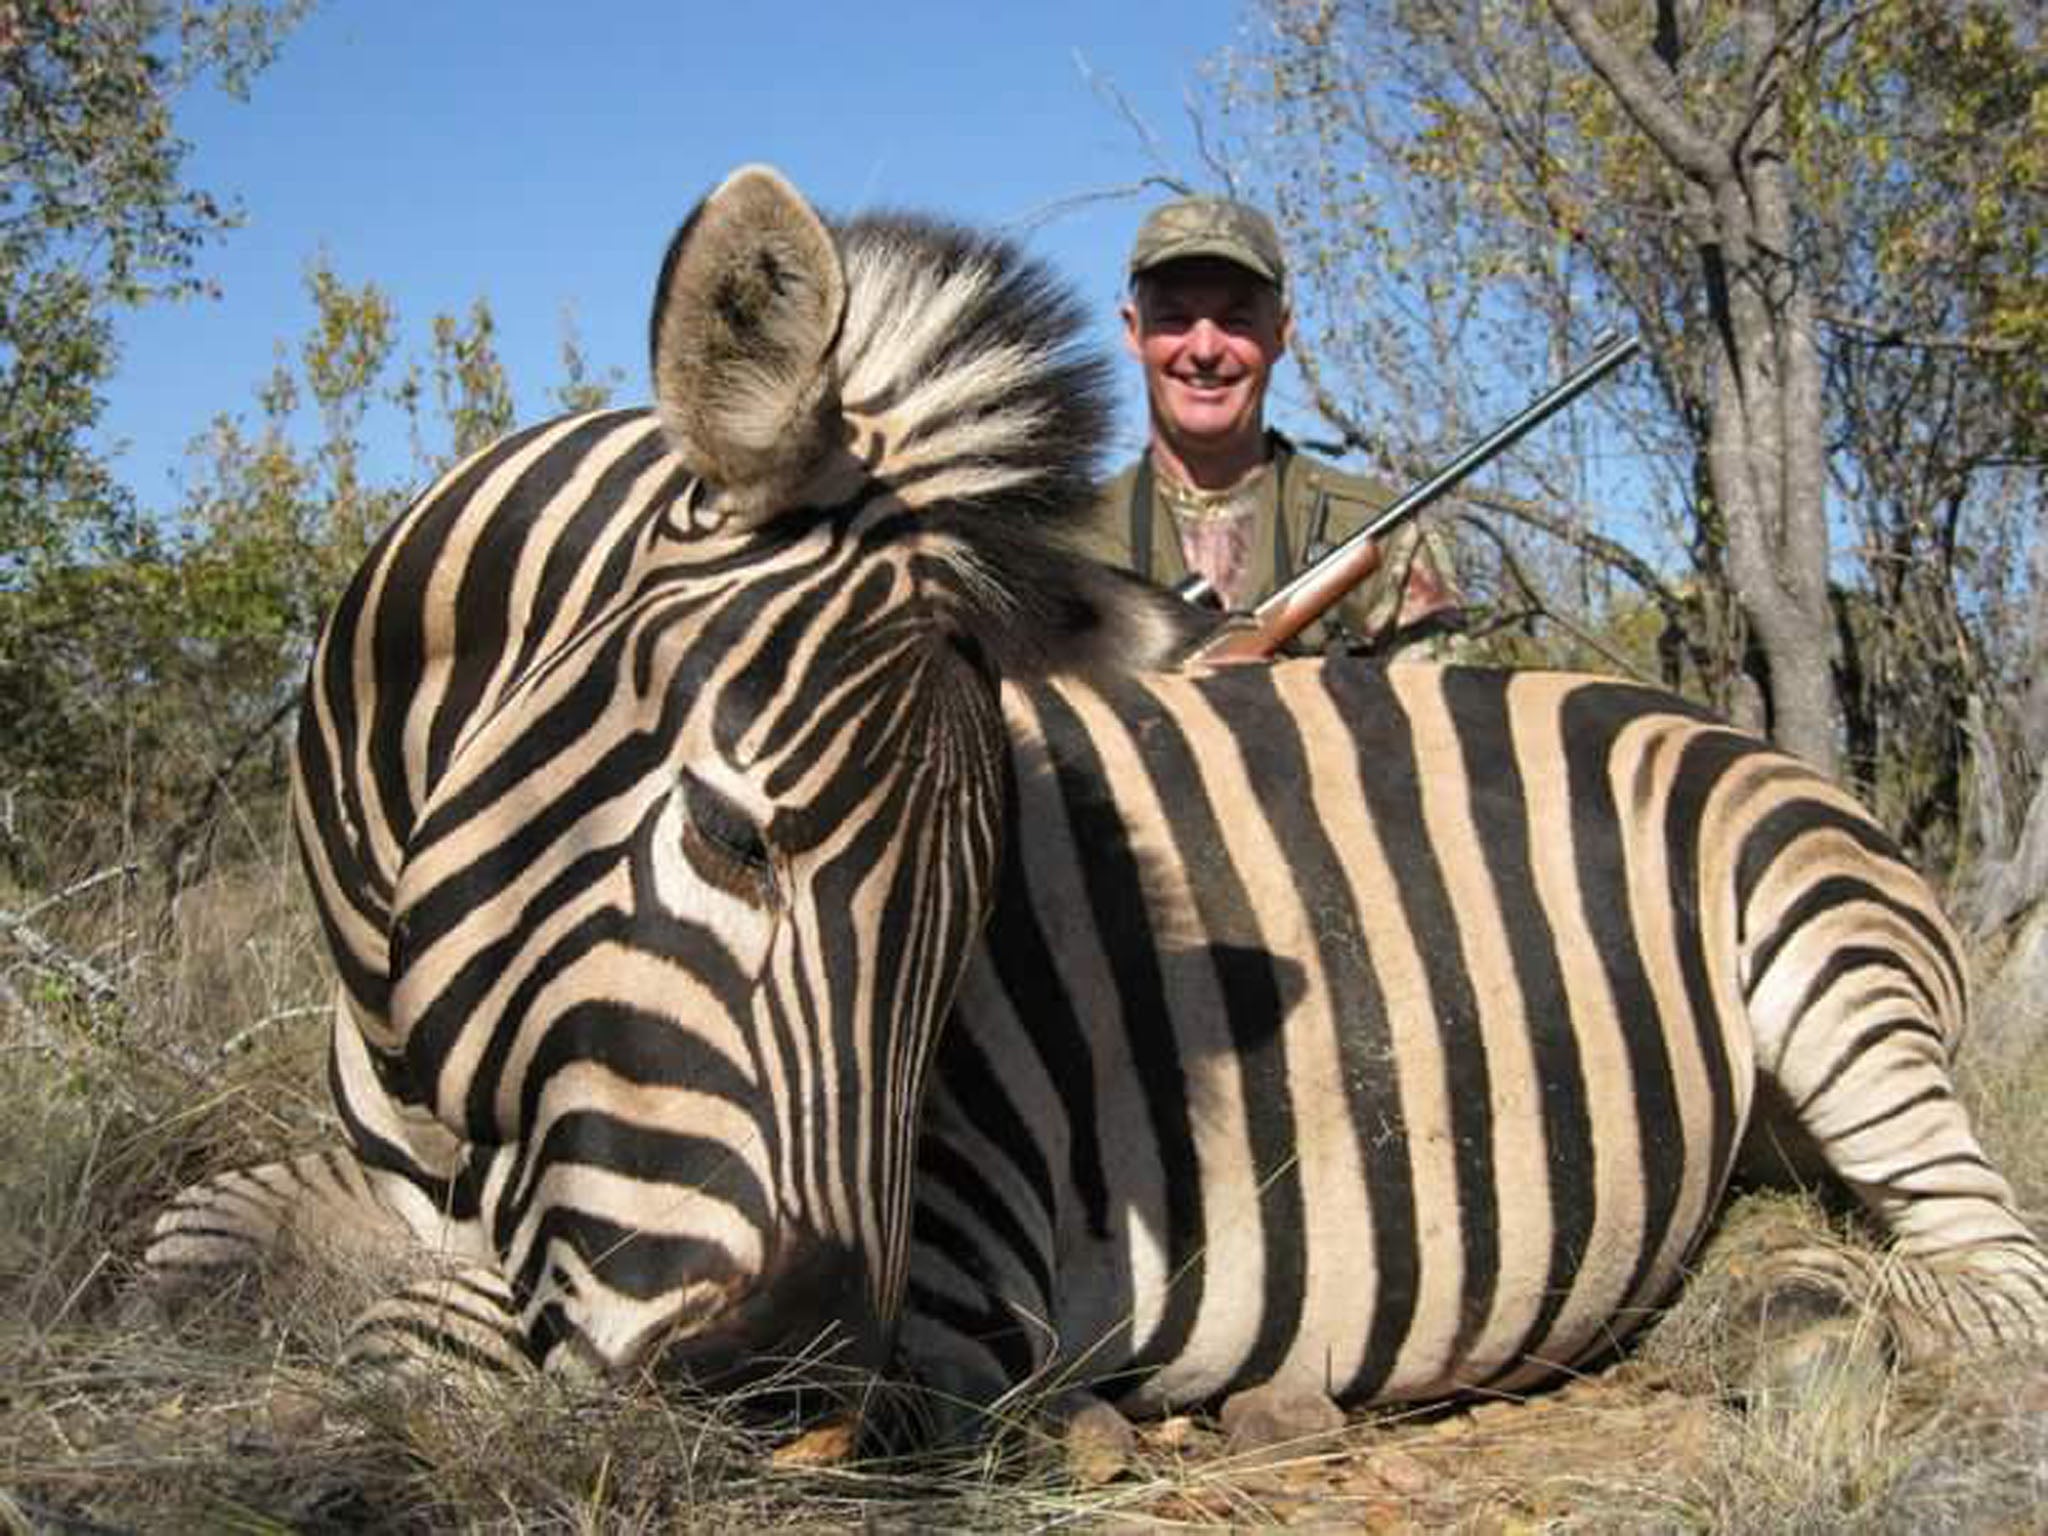 The 62-year-old and a zebra he shot